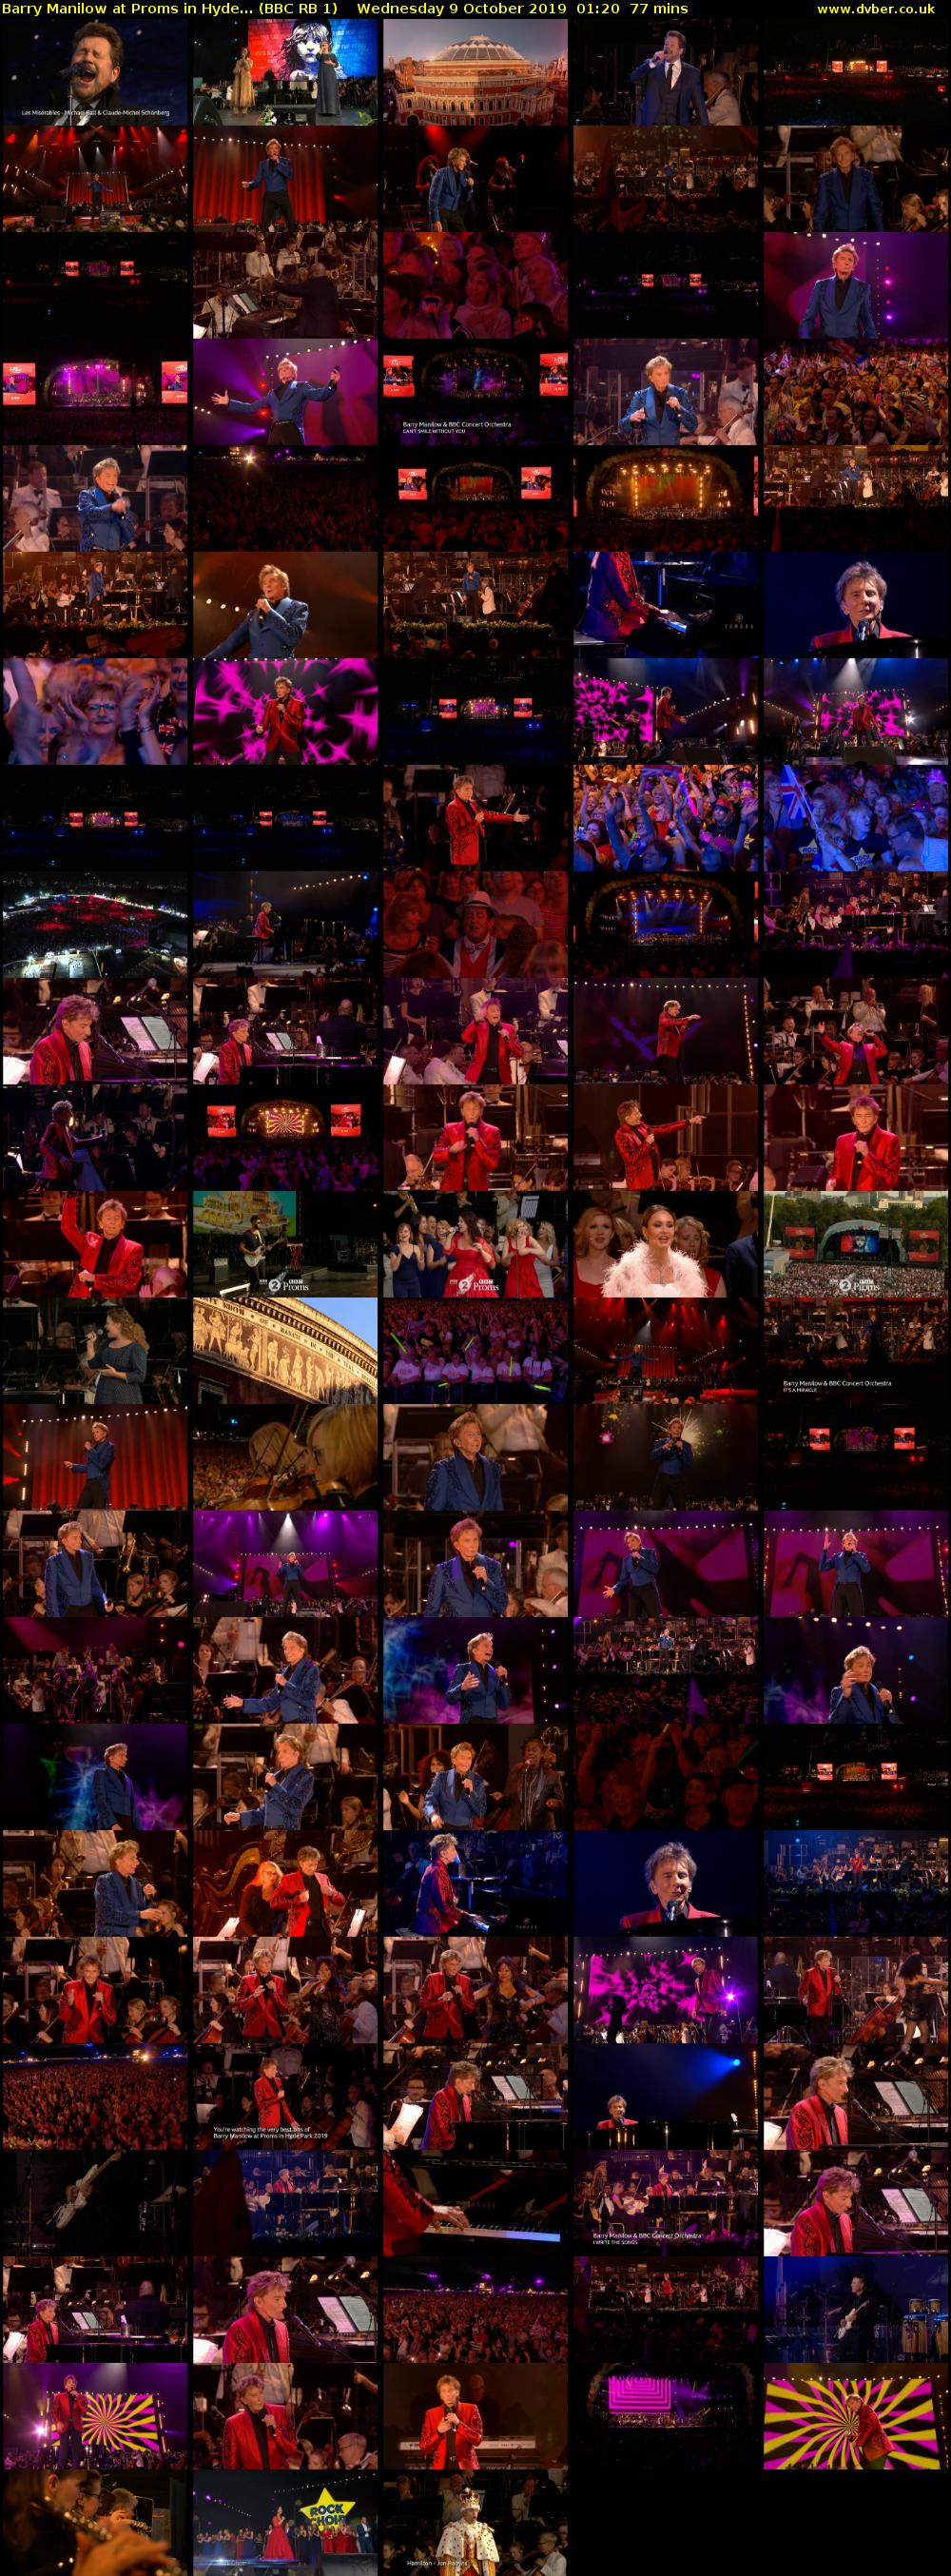 Barry Manilow at Proms in Hyde... (BBC RB 1) Wednesday 9 October 2019 01:20 - 02:37